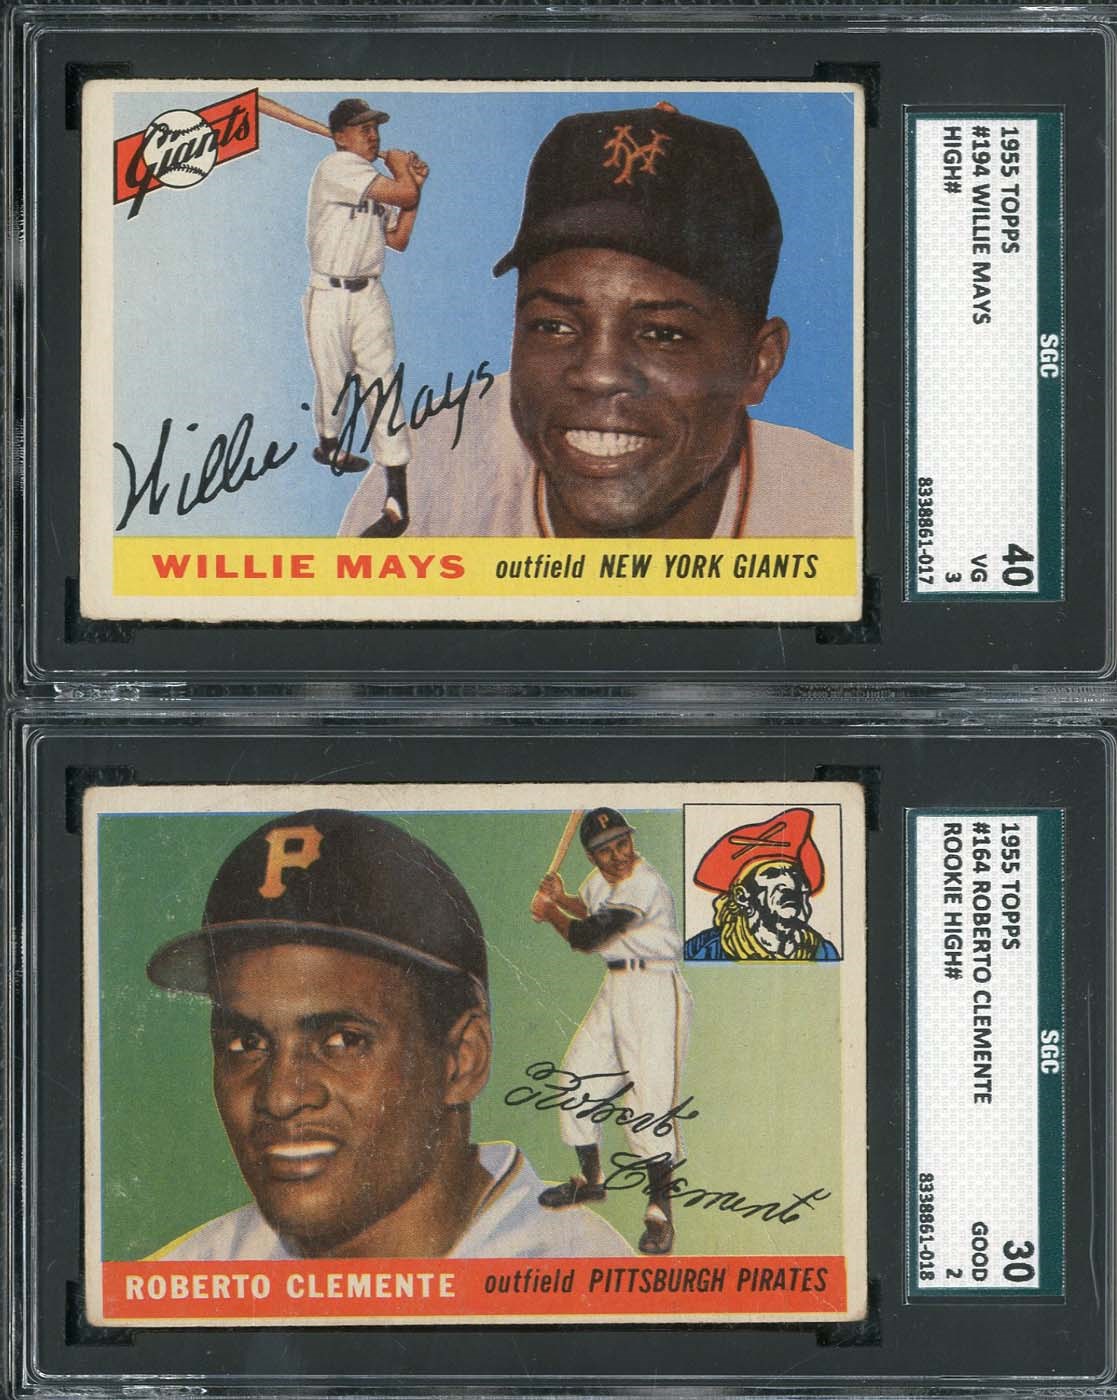 - 1955 Topps Near Set of (203/206) with SGC Graded Clemente and Mays